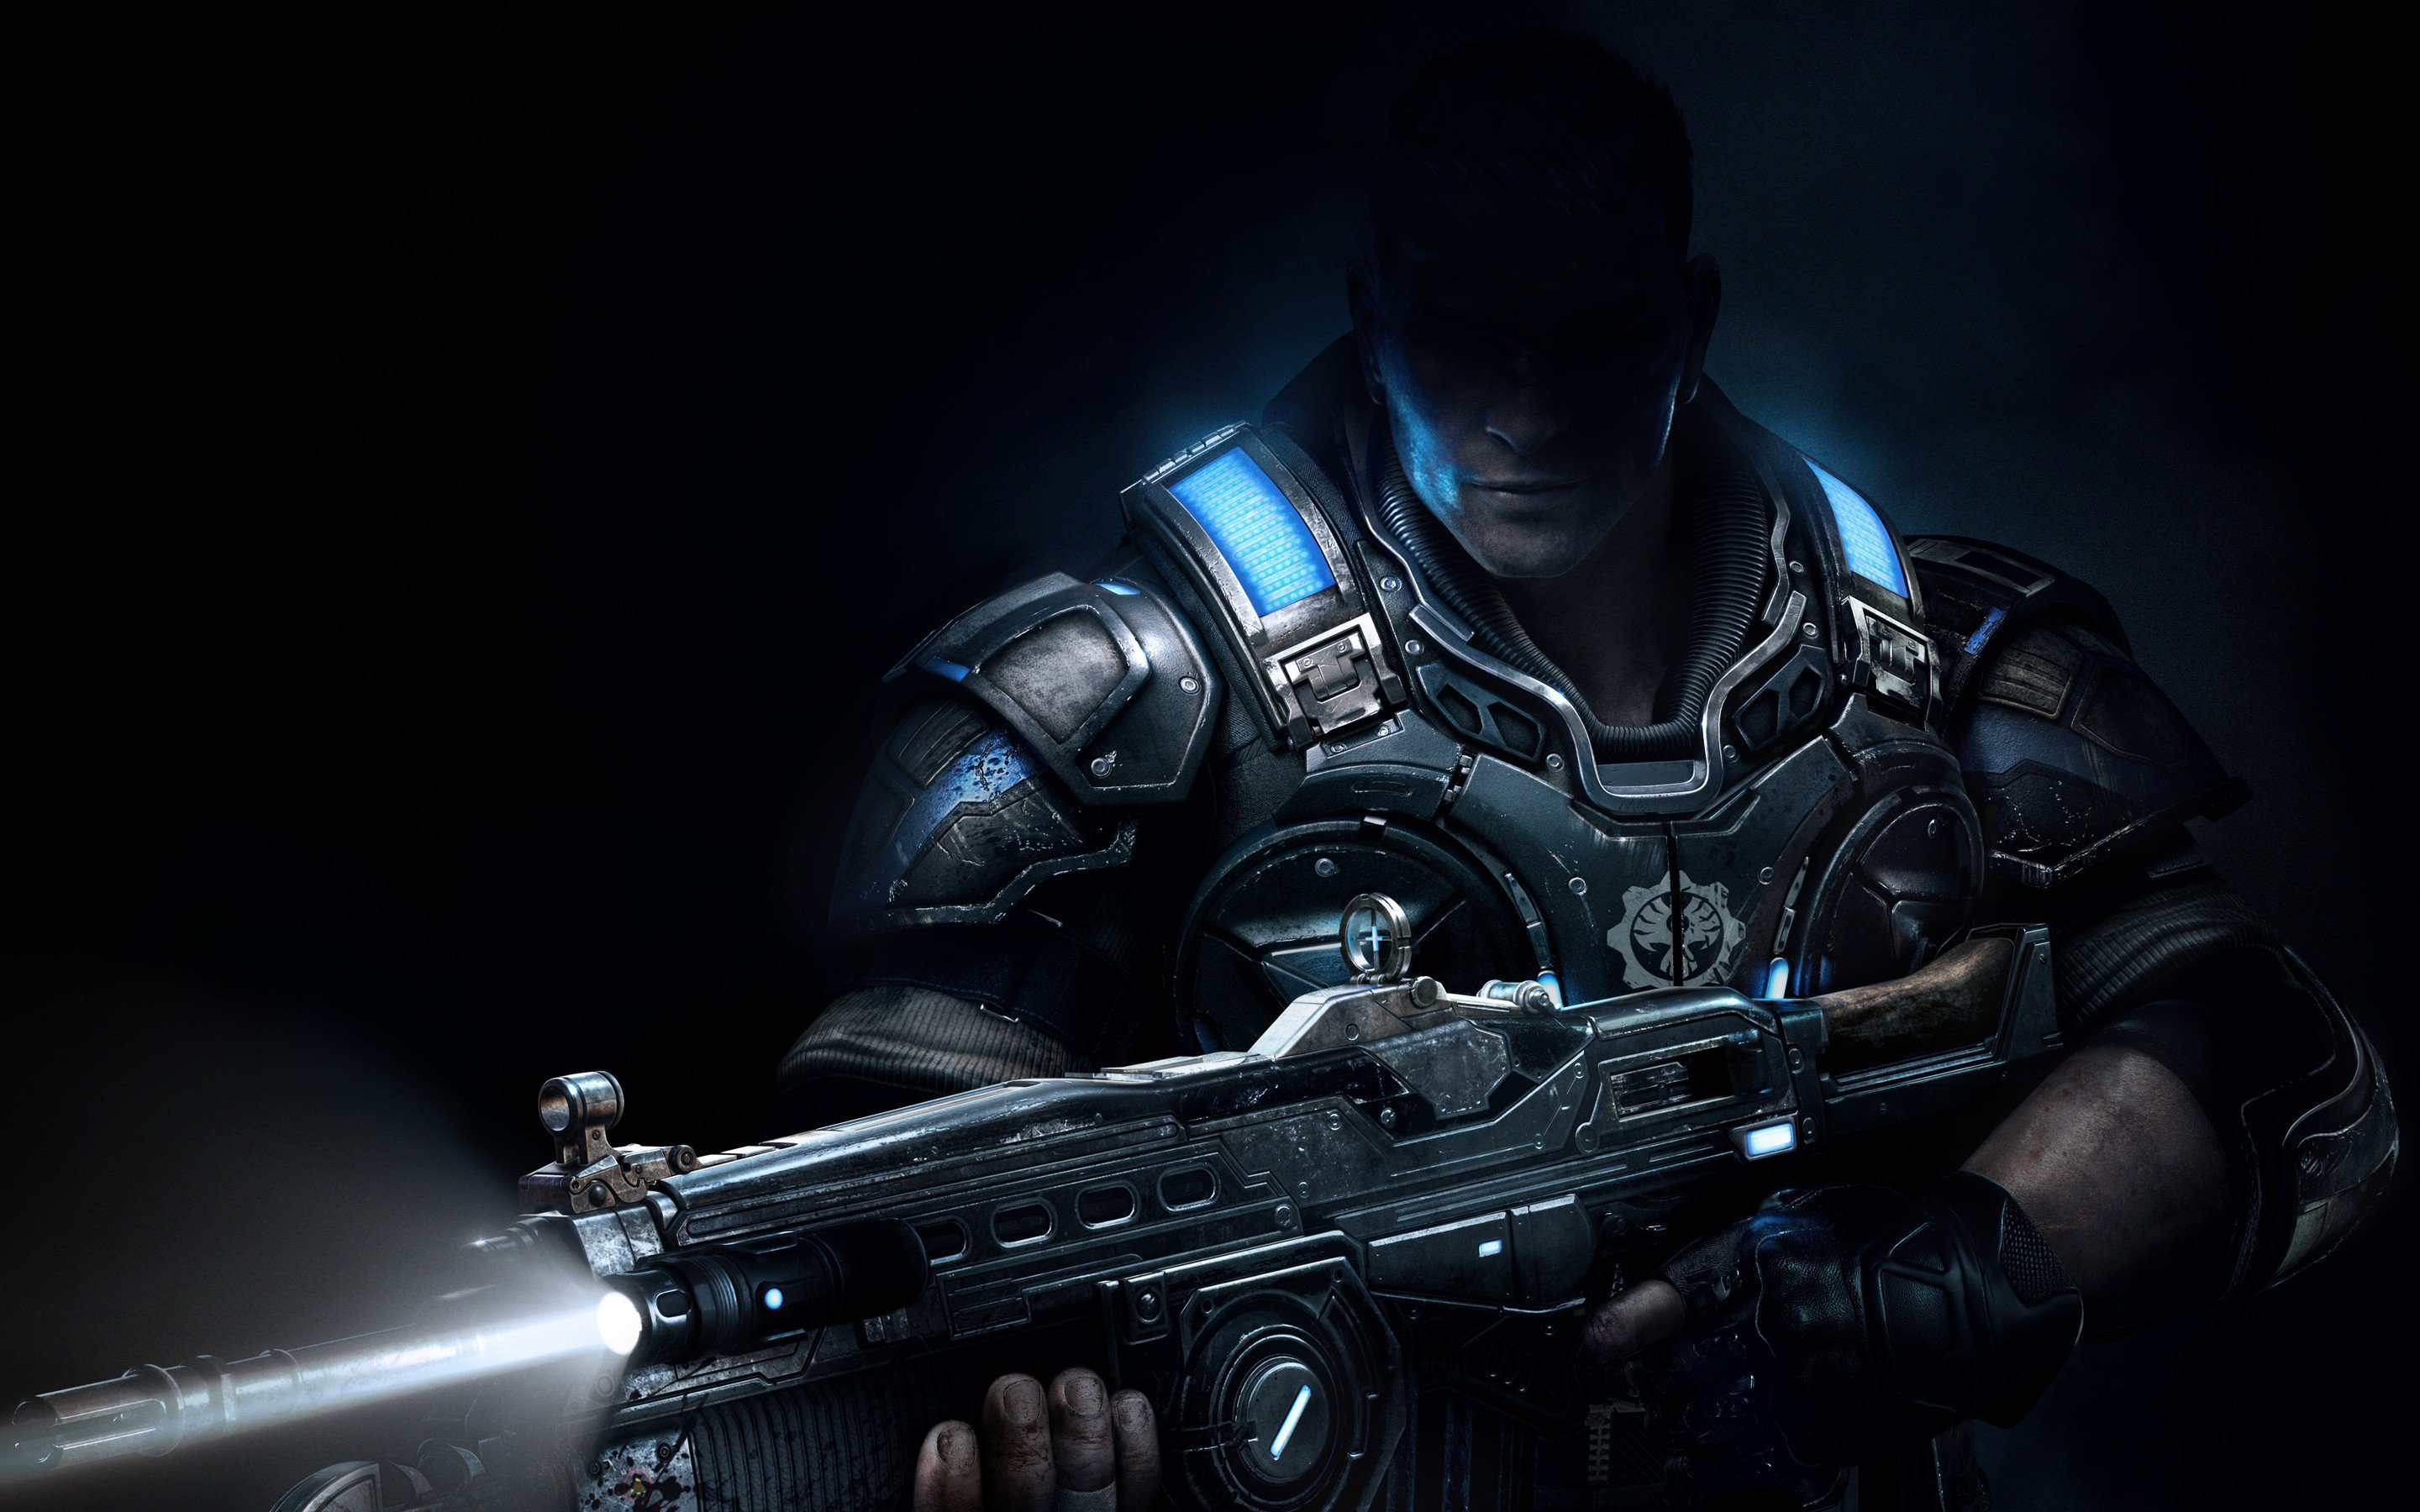 download free gears of war playstation 4